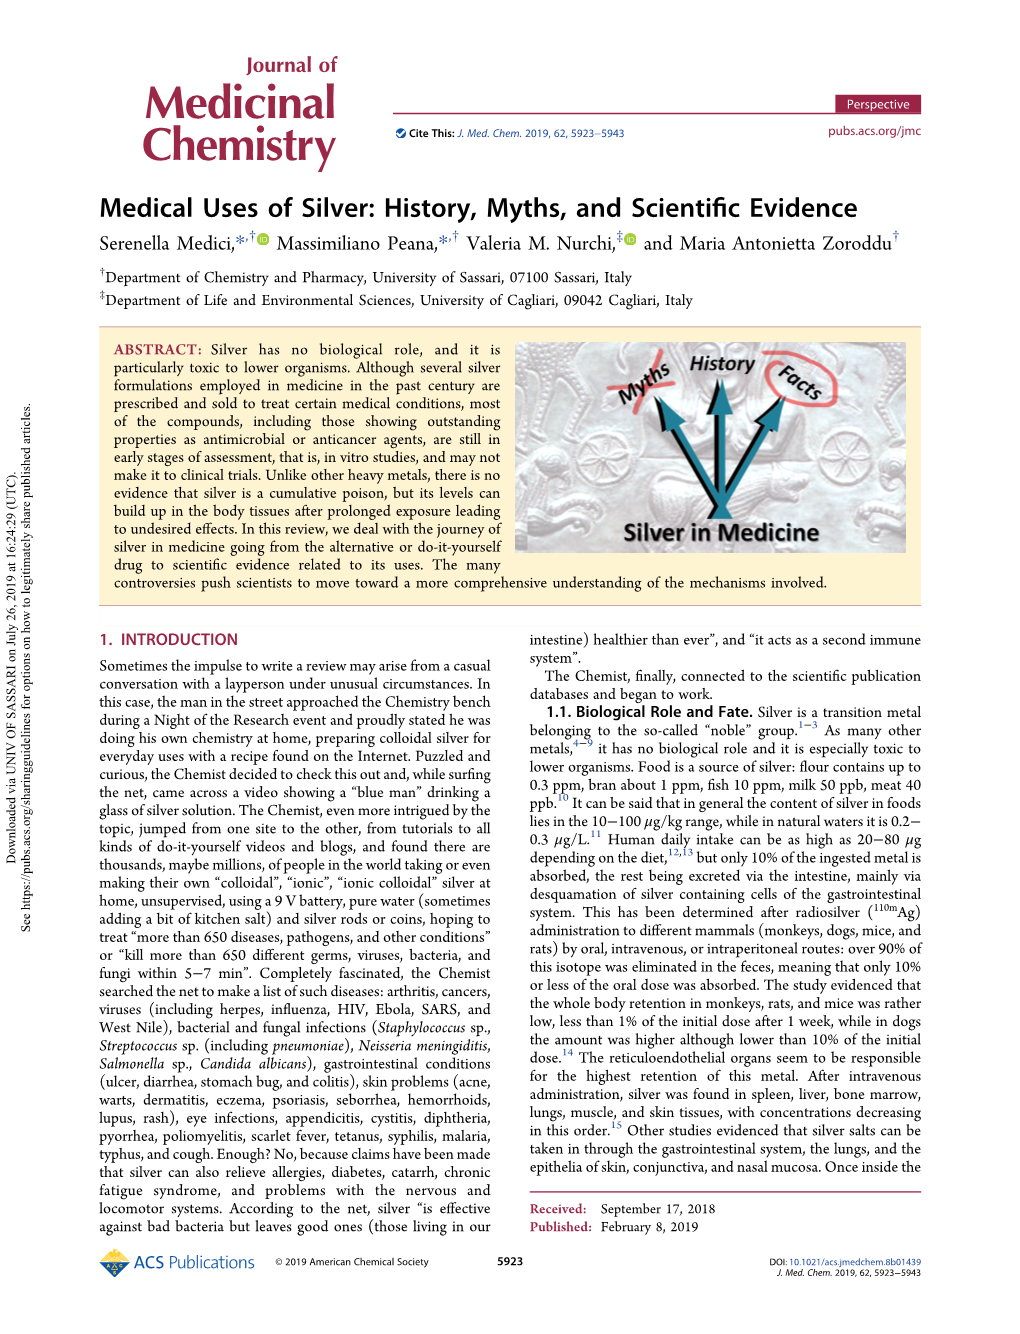 Medical Uses of Silver: History, Myths, and Scientific Evidence